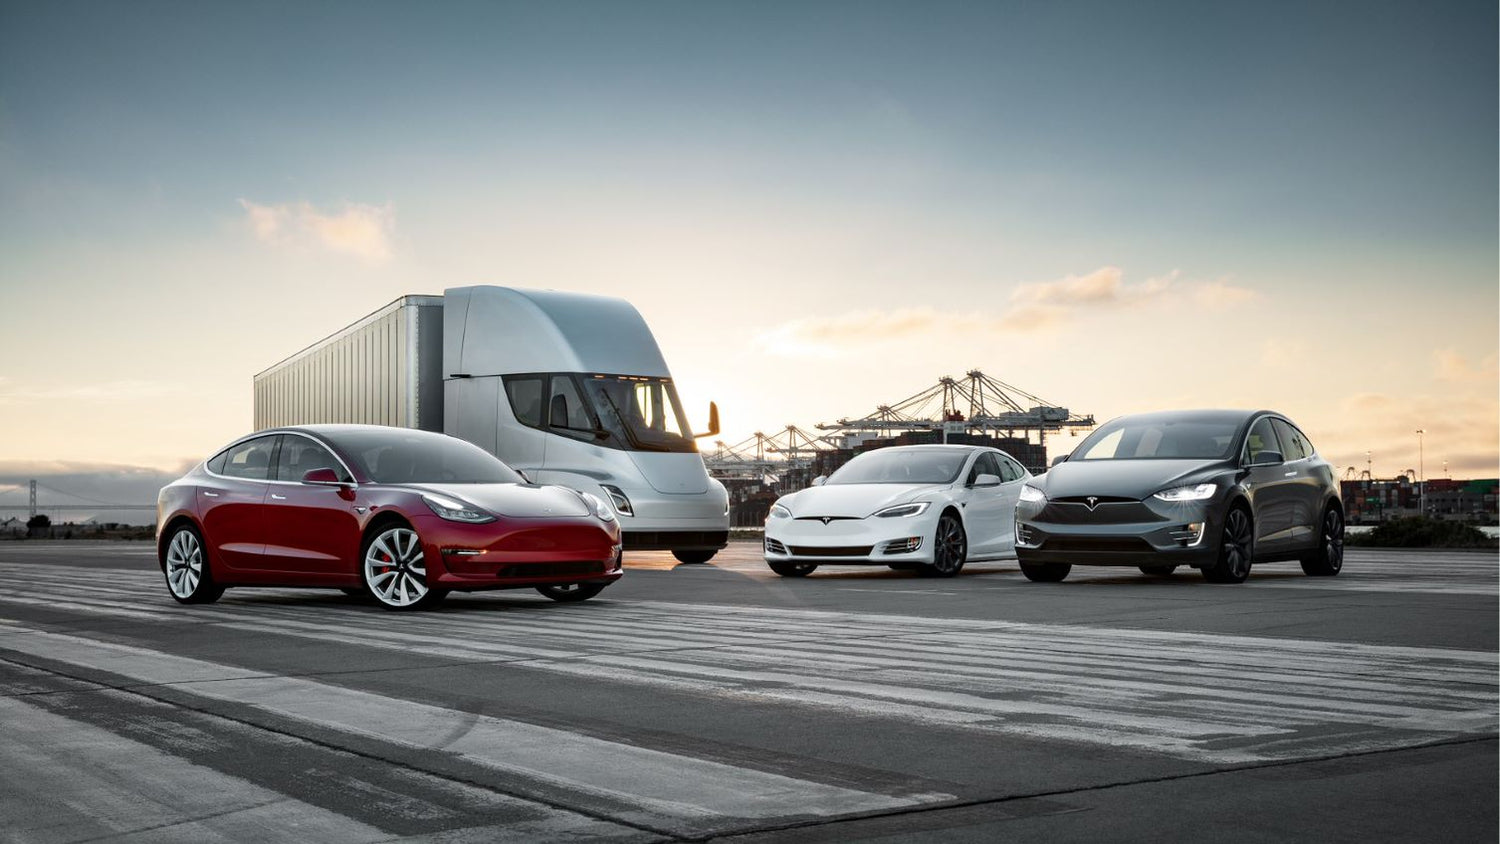 Tesla Impact Report 2019: Sustainability and Safety is what Drives Tesla